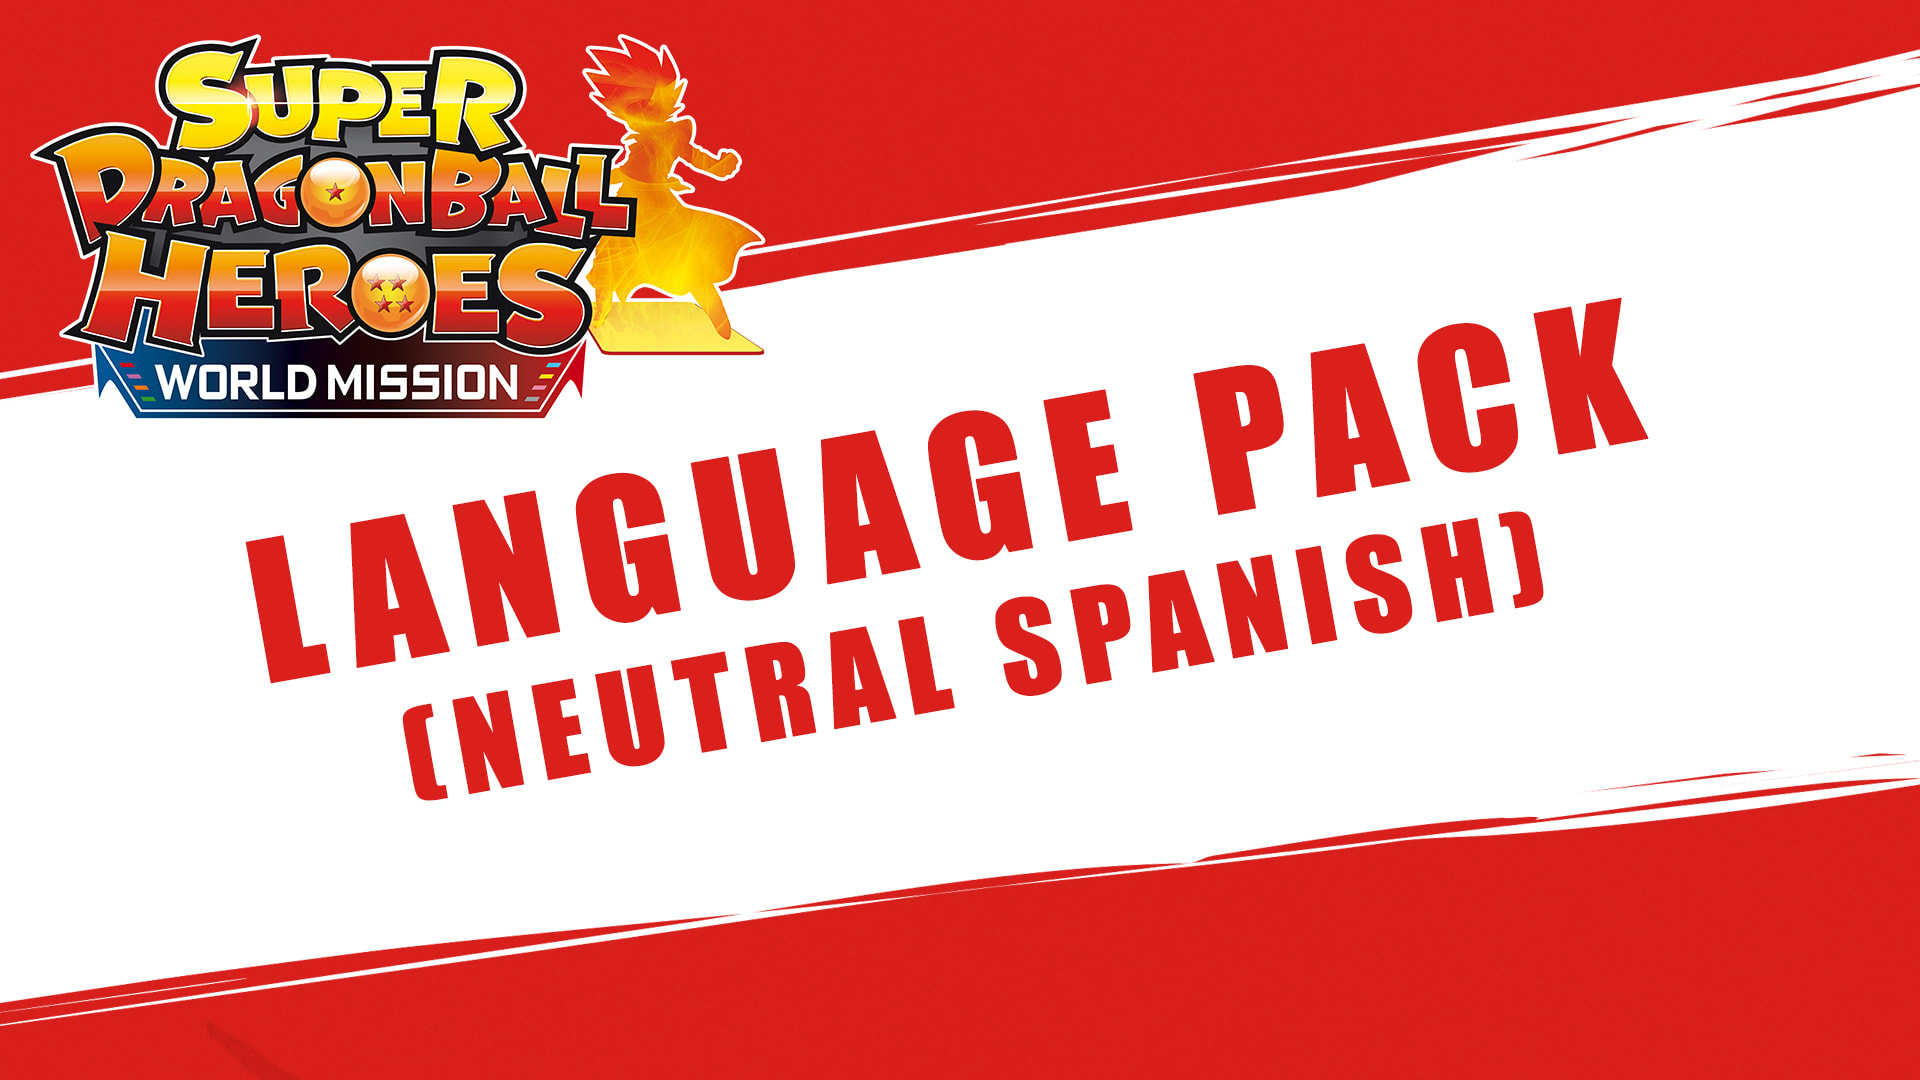 SUPER DRAGON BALL HEROES WORLD MISSION - Language Pack (Neutral Spanish)